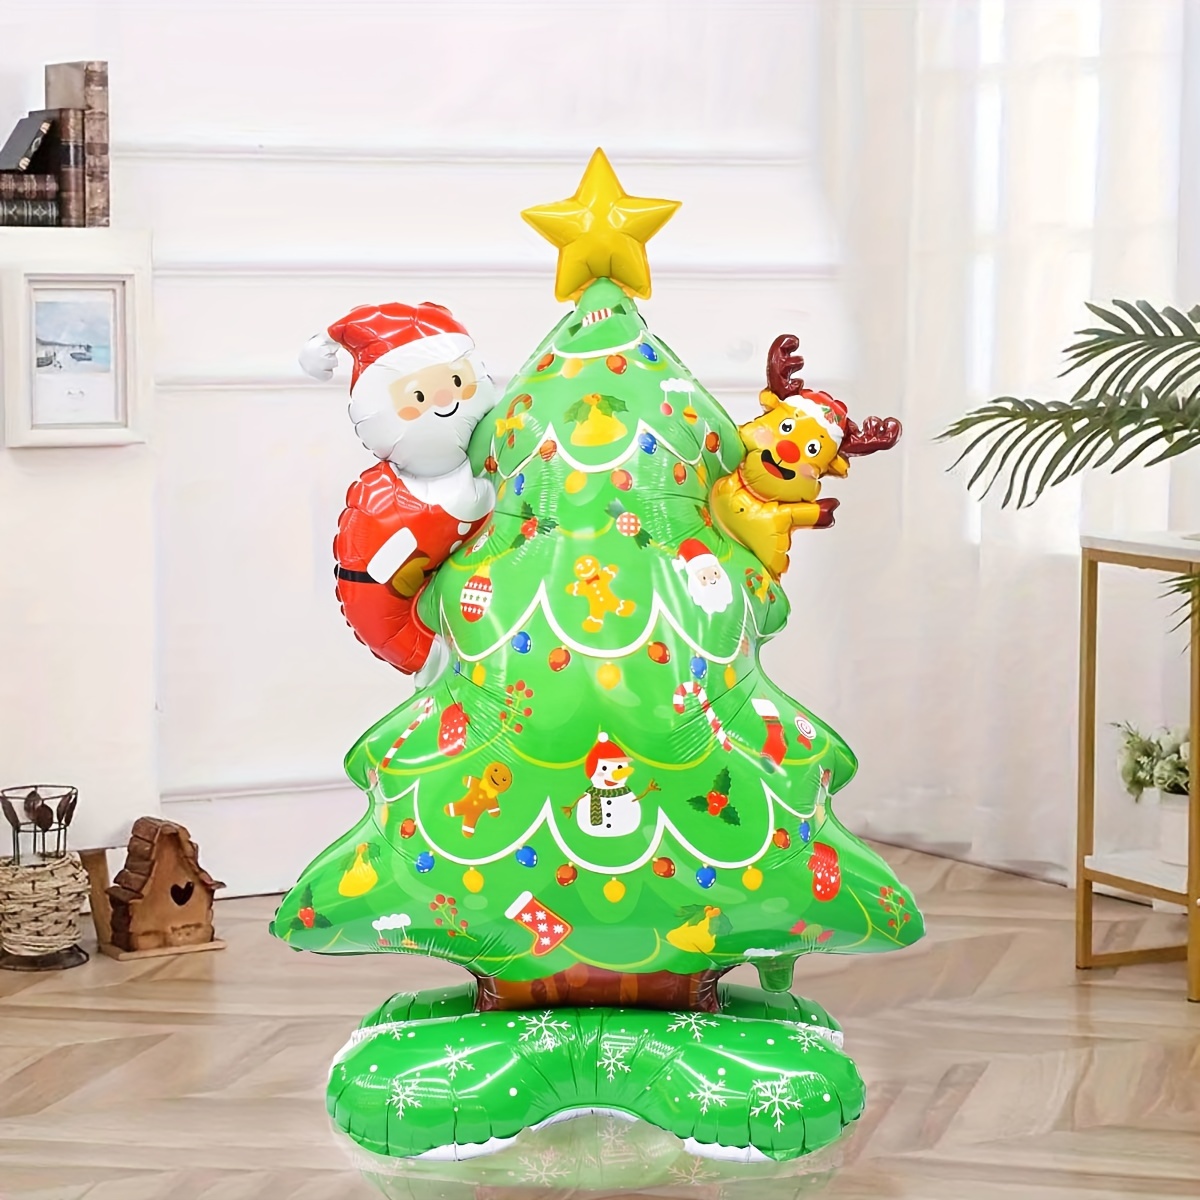 

61-inch Reindeer & Christmas Tree Foil Balloon - Perfect For Holiday Parties, Home Decor & Festive Events Balloon Decorations Party Balloon Decorations